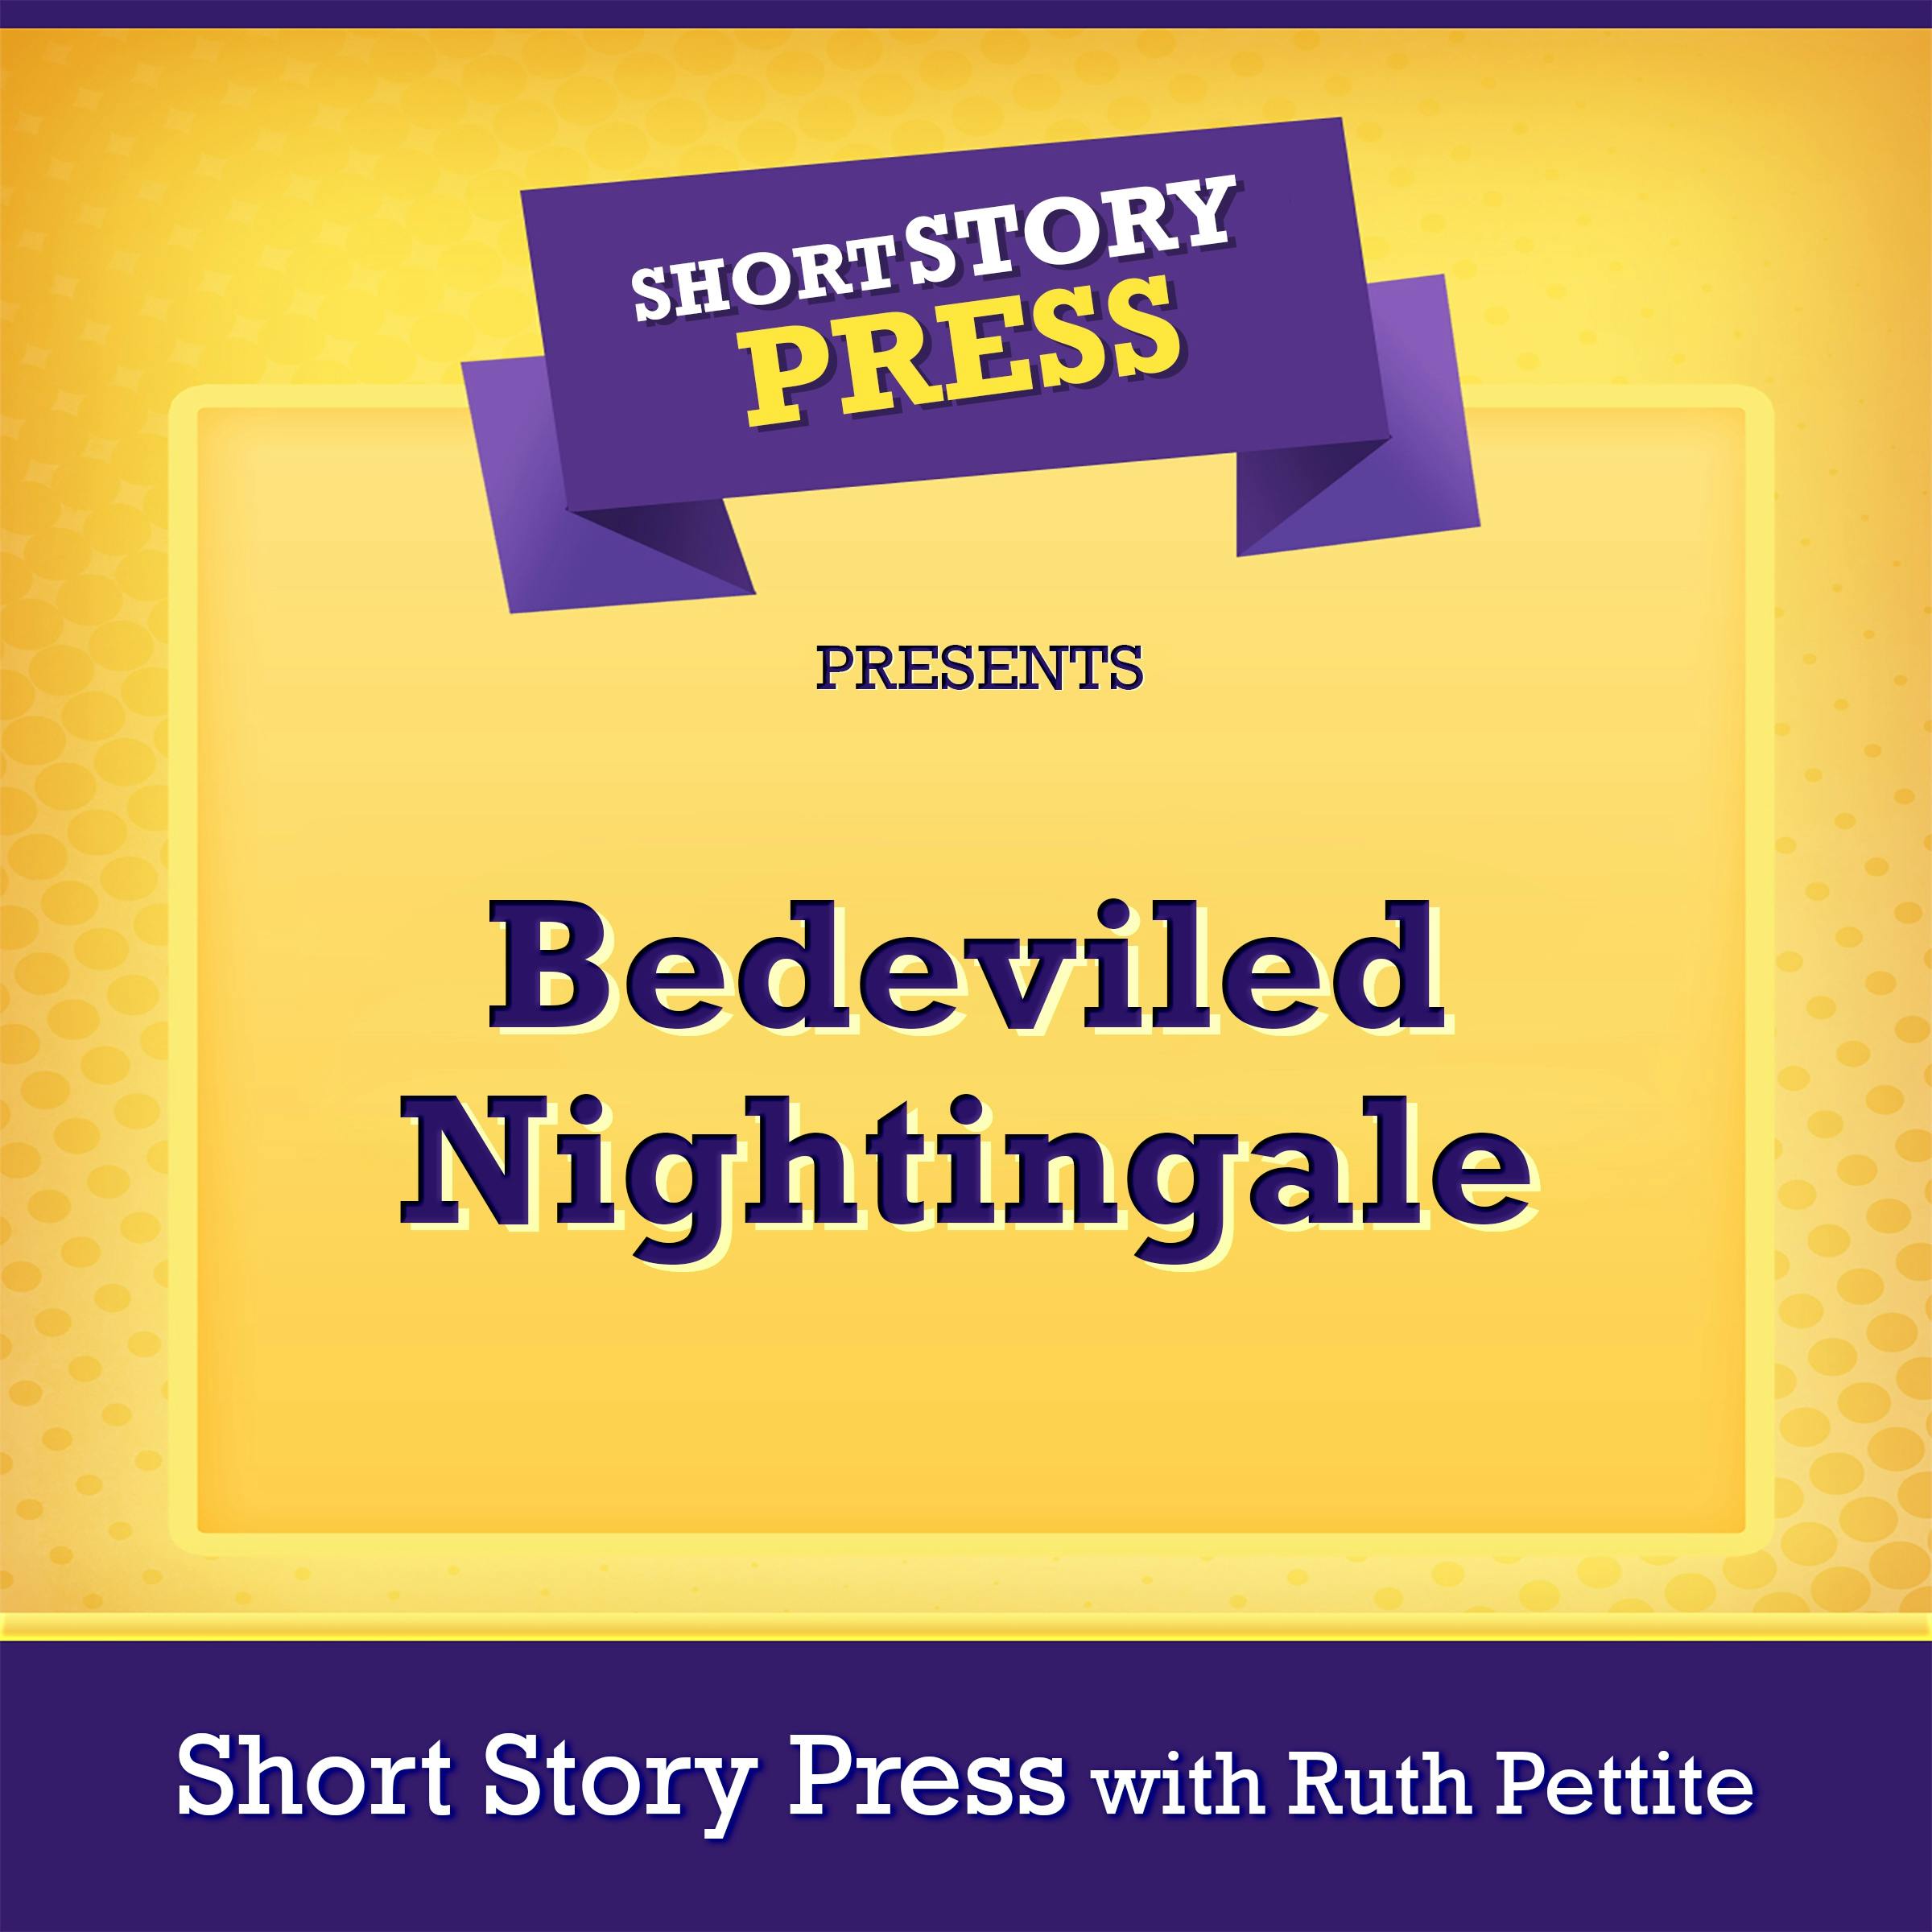 Short Story Press Presents Bedeviled Nightingale - undefined